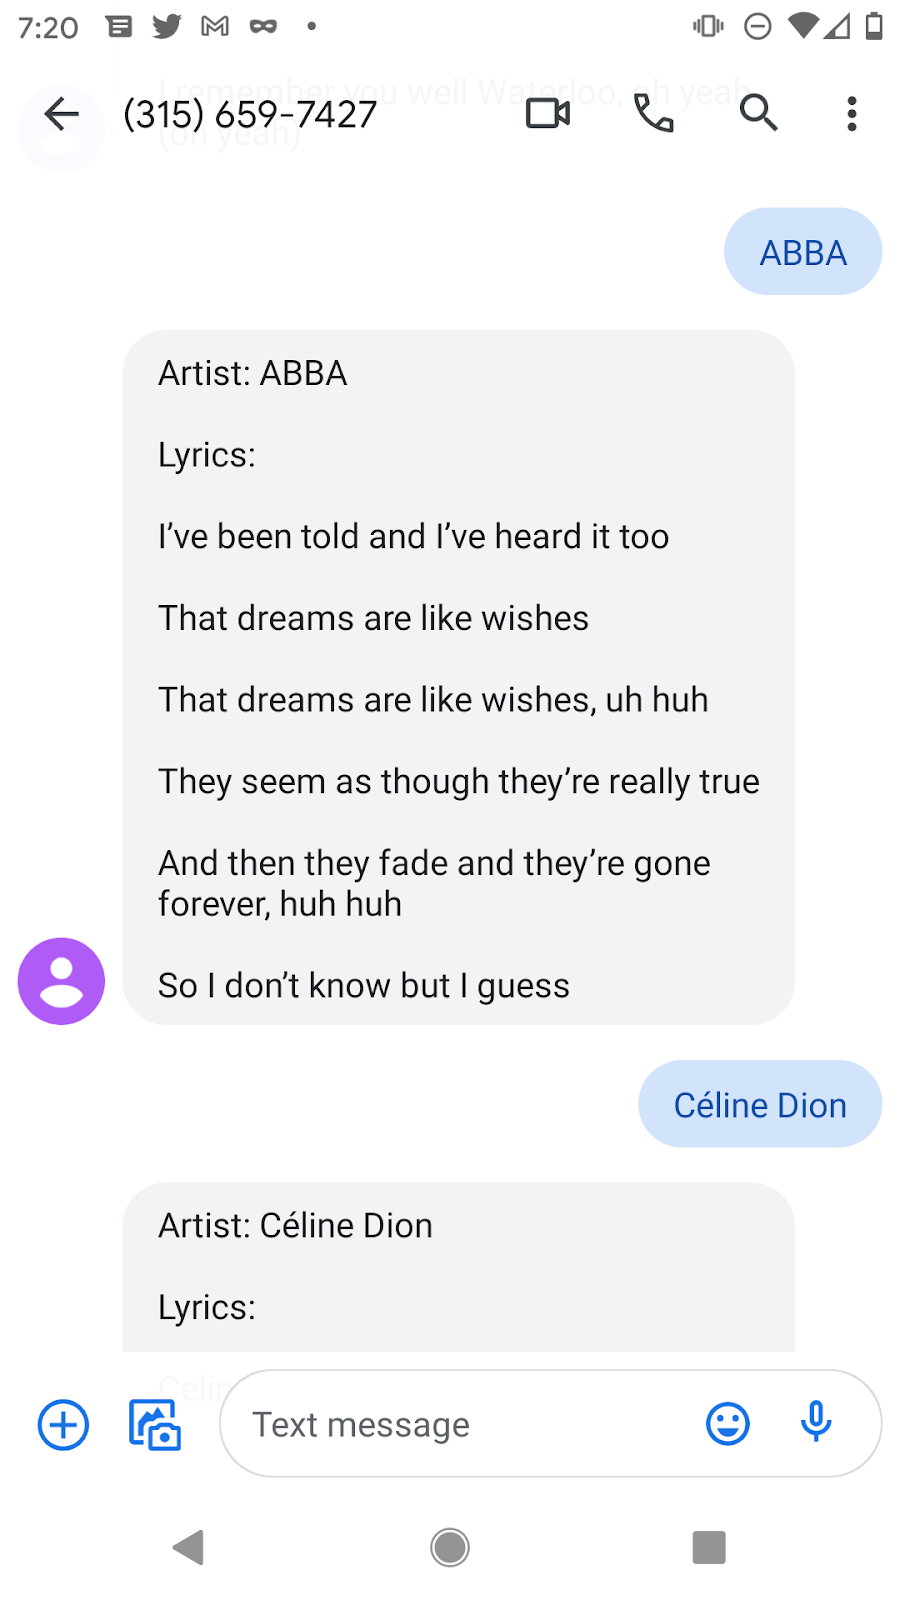 Some lyrics based on ABBA, created by a bot